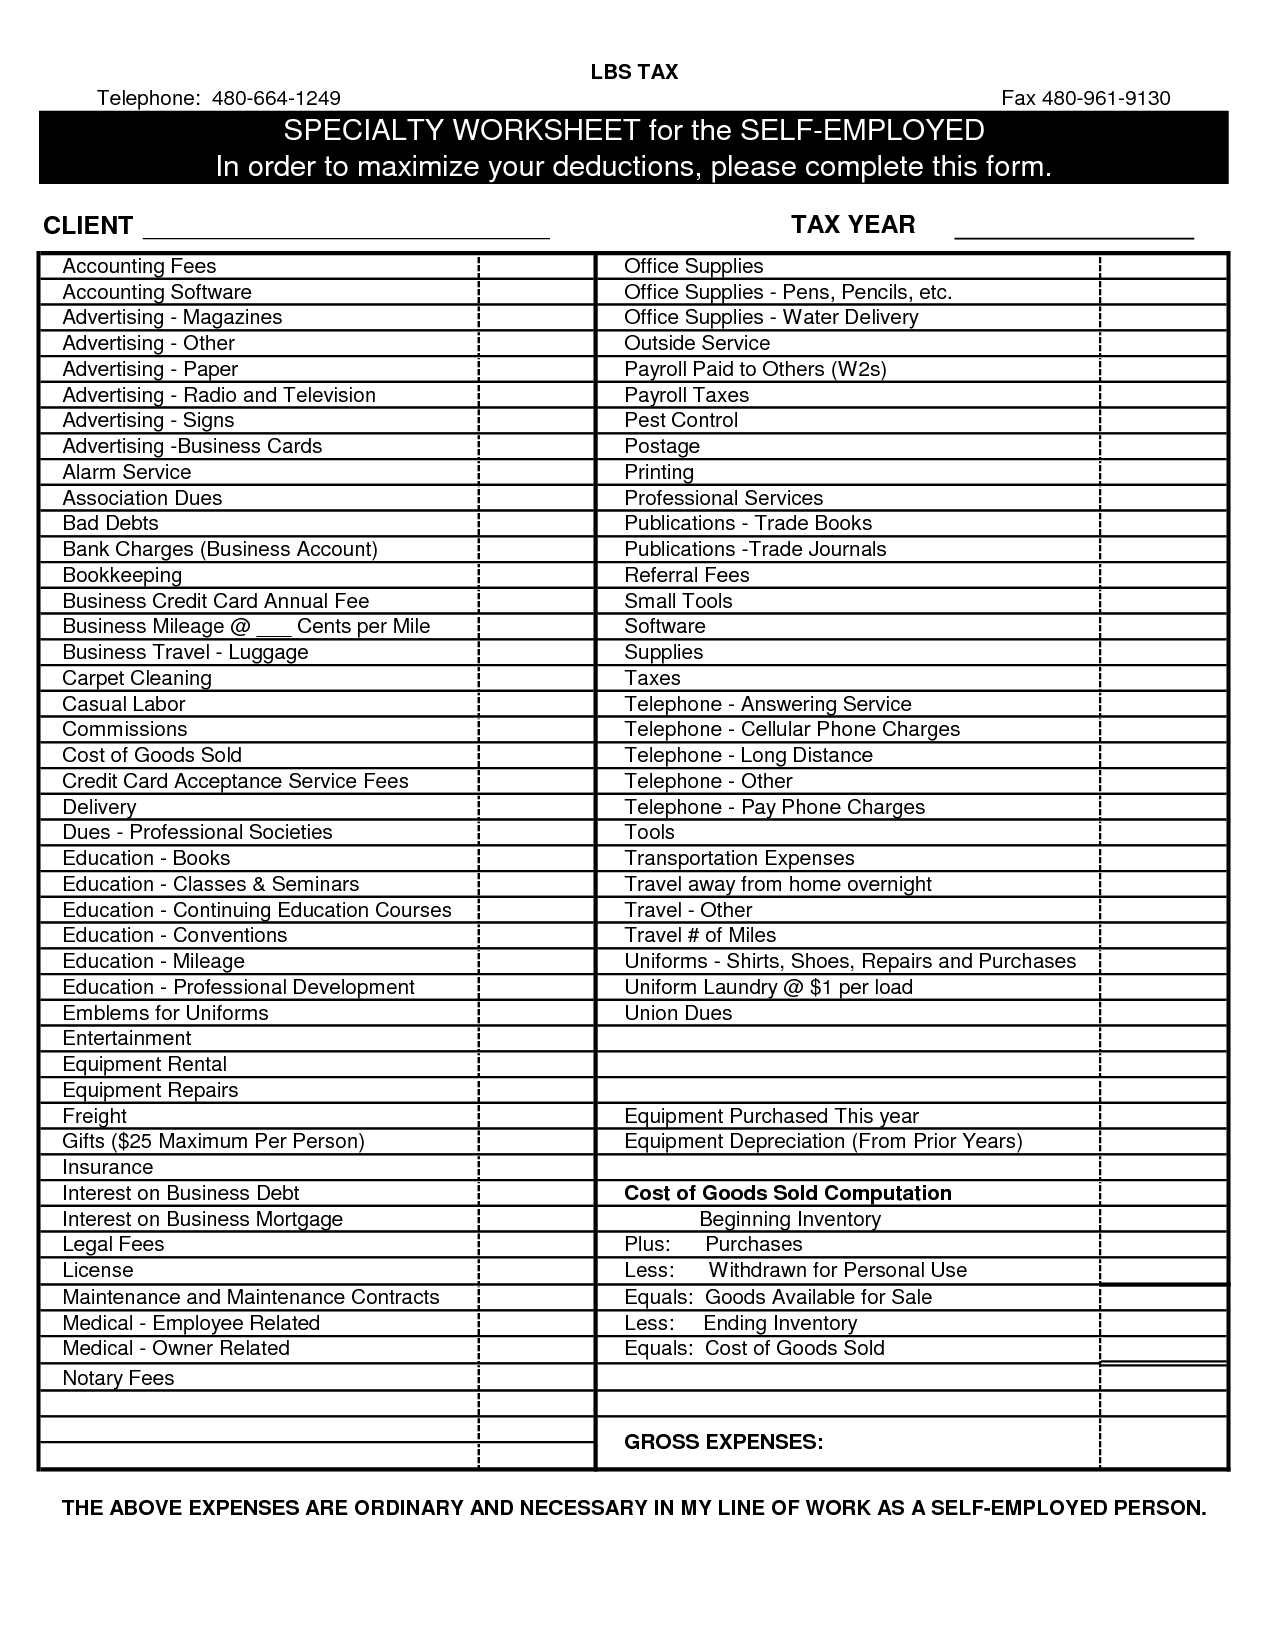 Document Of Self Employed Expense Spreadsheet Intended For Self Employed Expense Spreadsheet Free Download